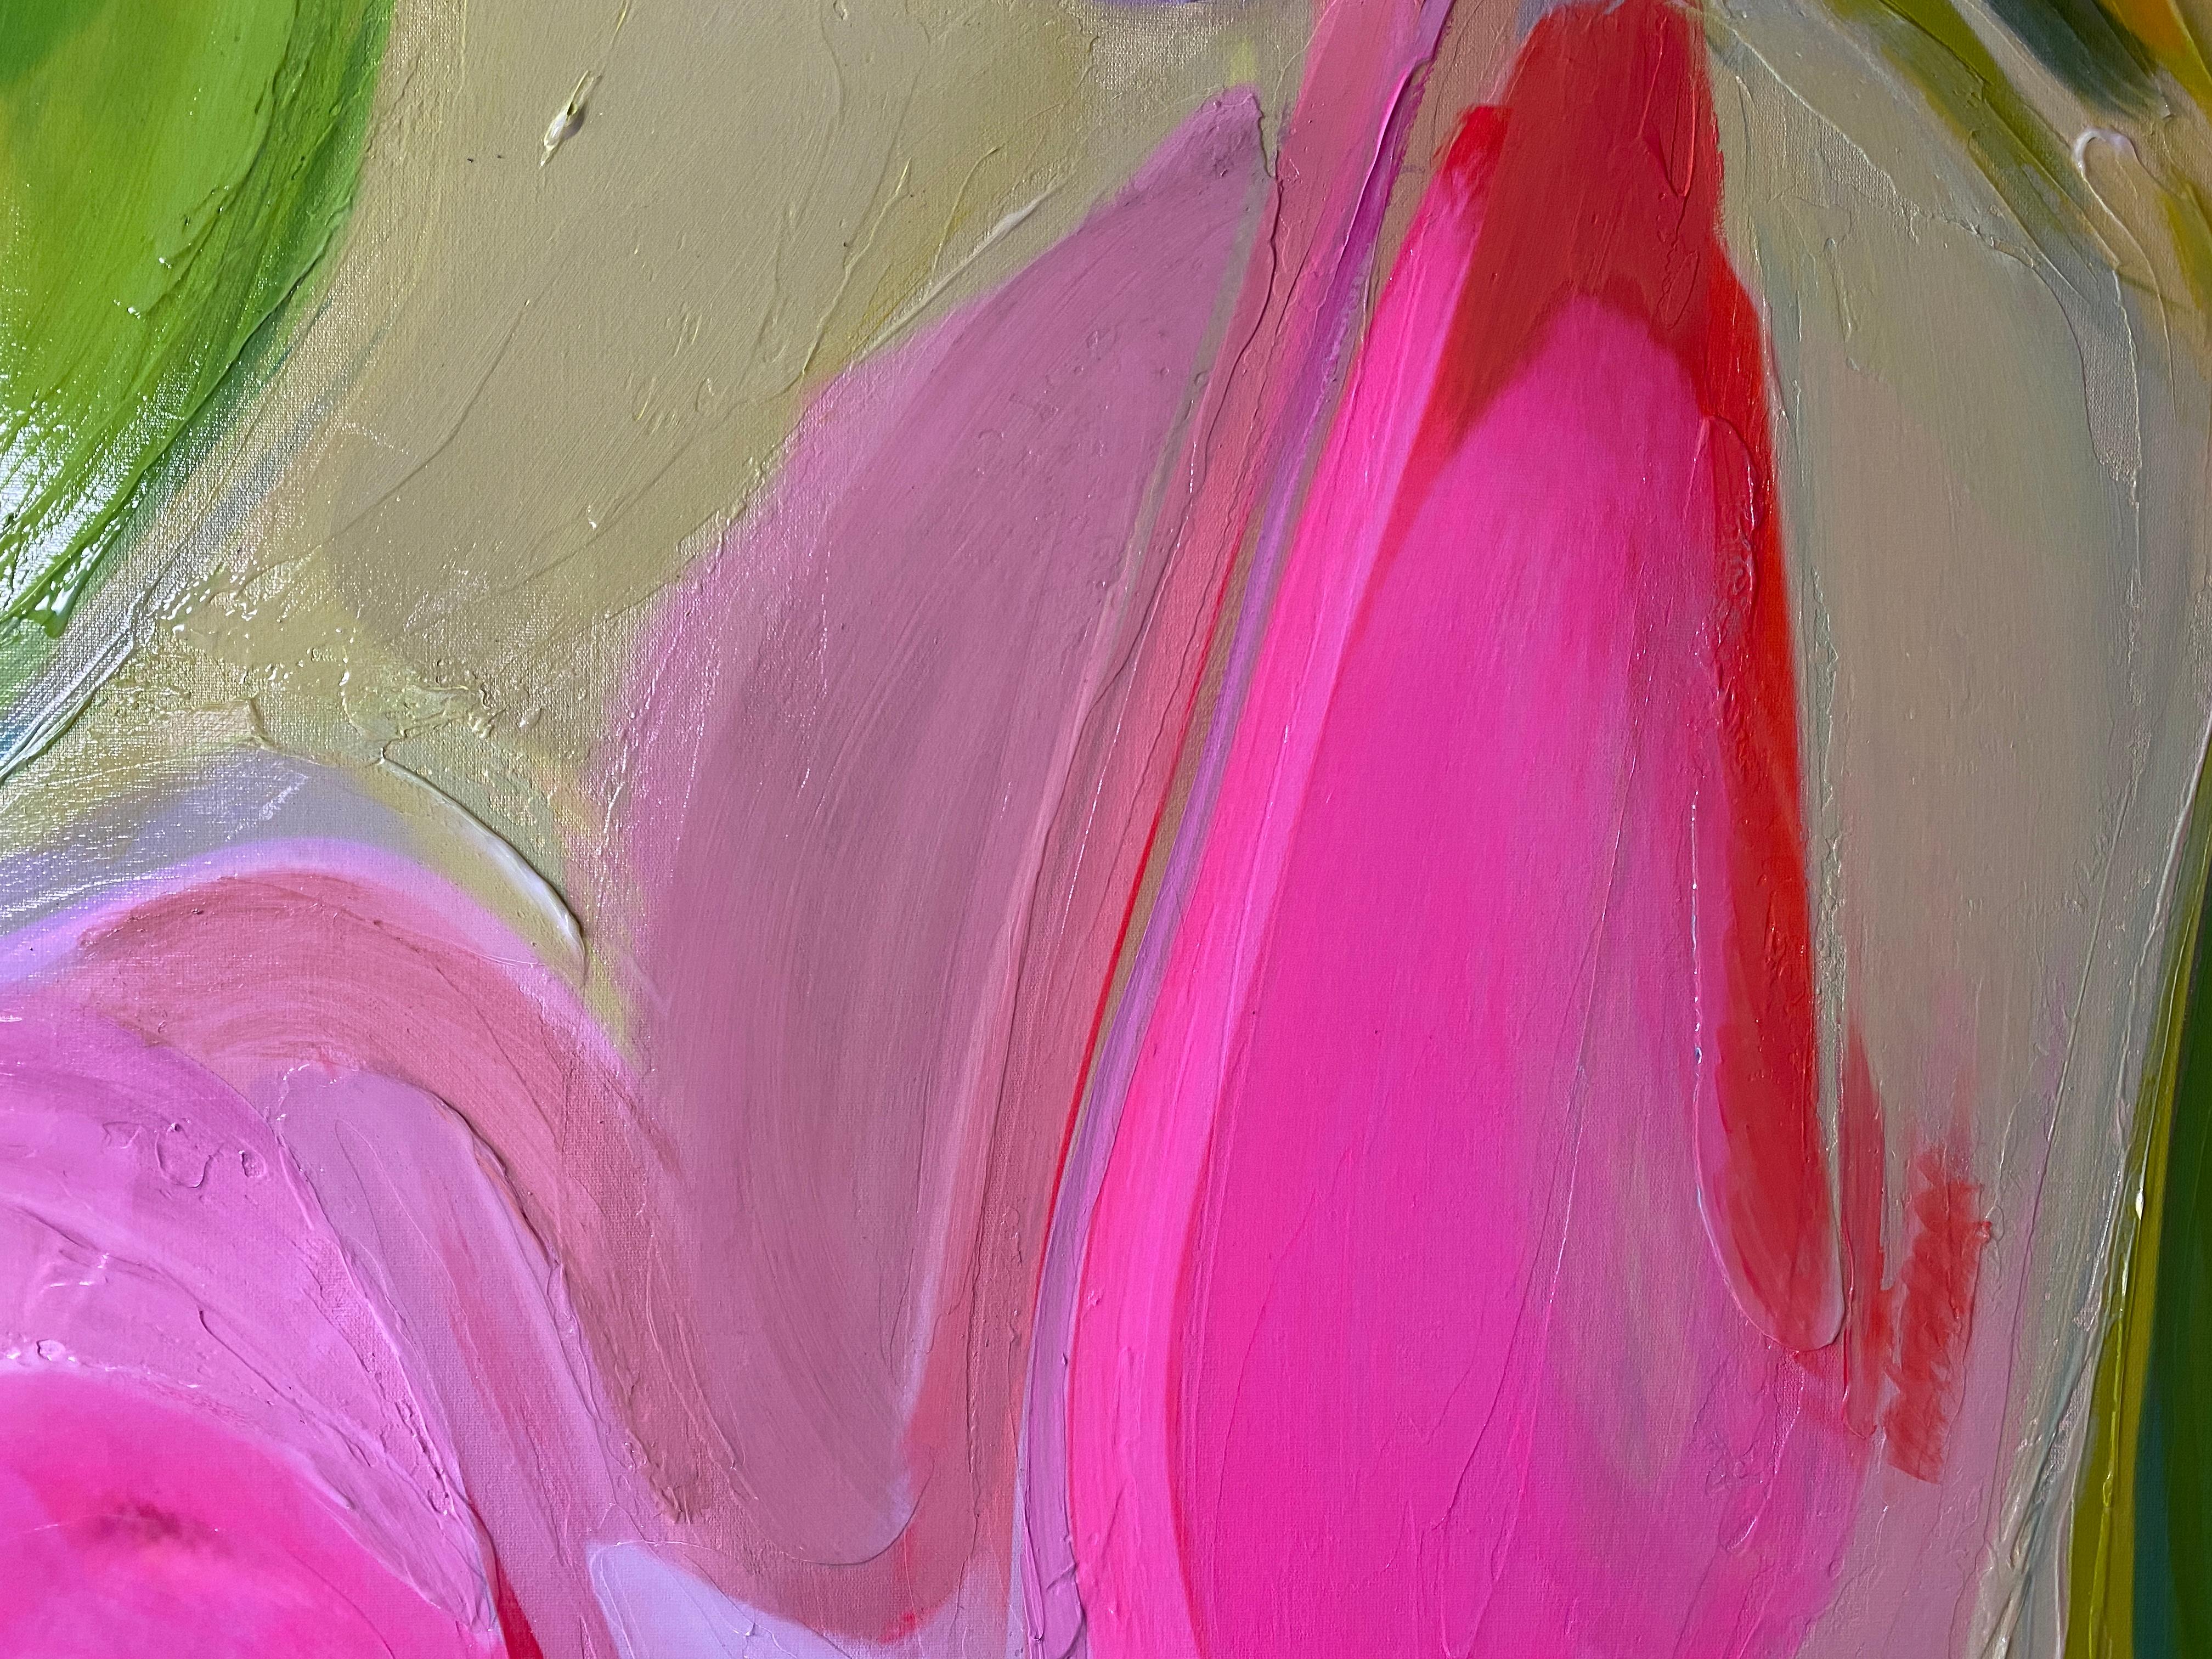 Pink Green Abstract Painting Textured Giclee on Canvas 40x60